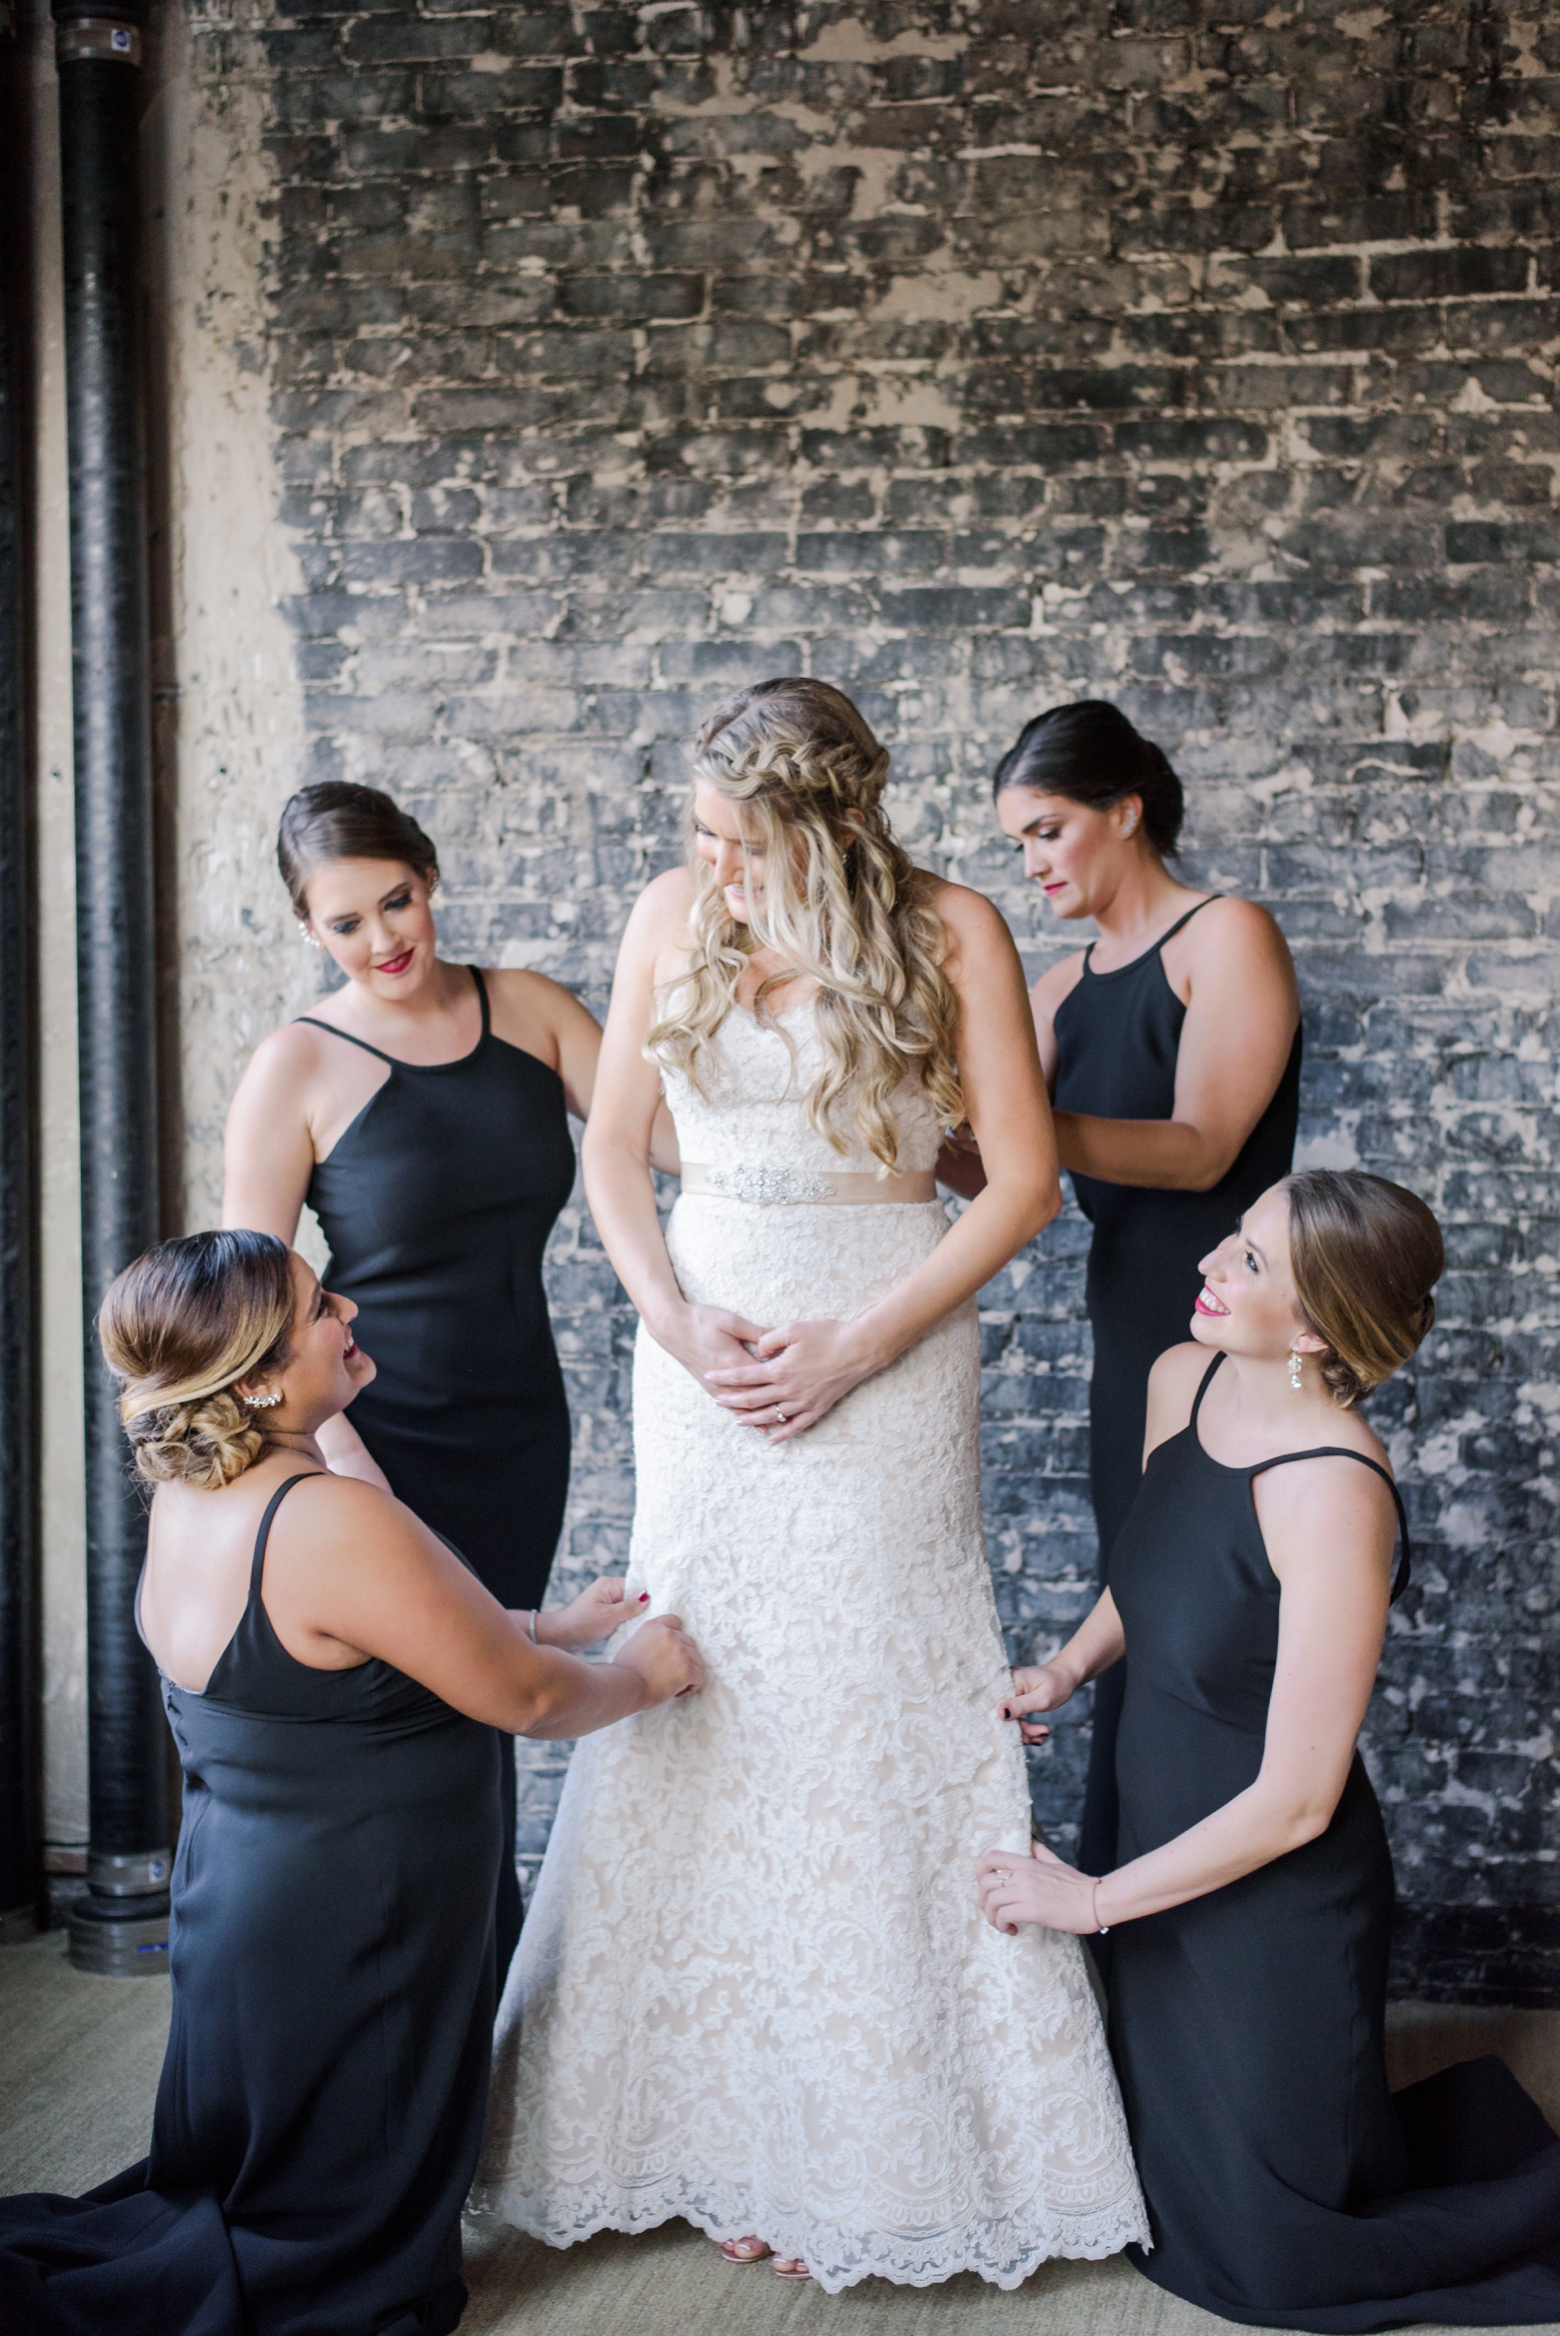 The Bride surrounded by her Bridesmaids as they assist in adjusting the dress to absolute perfection